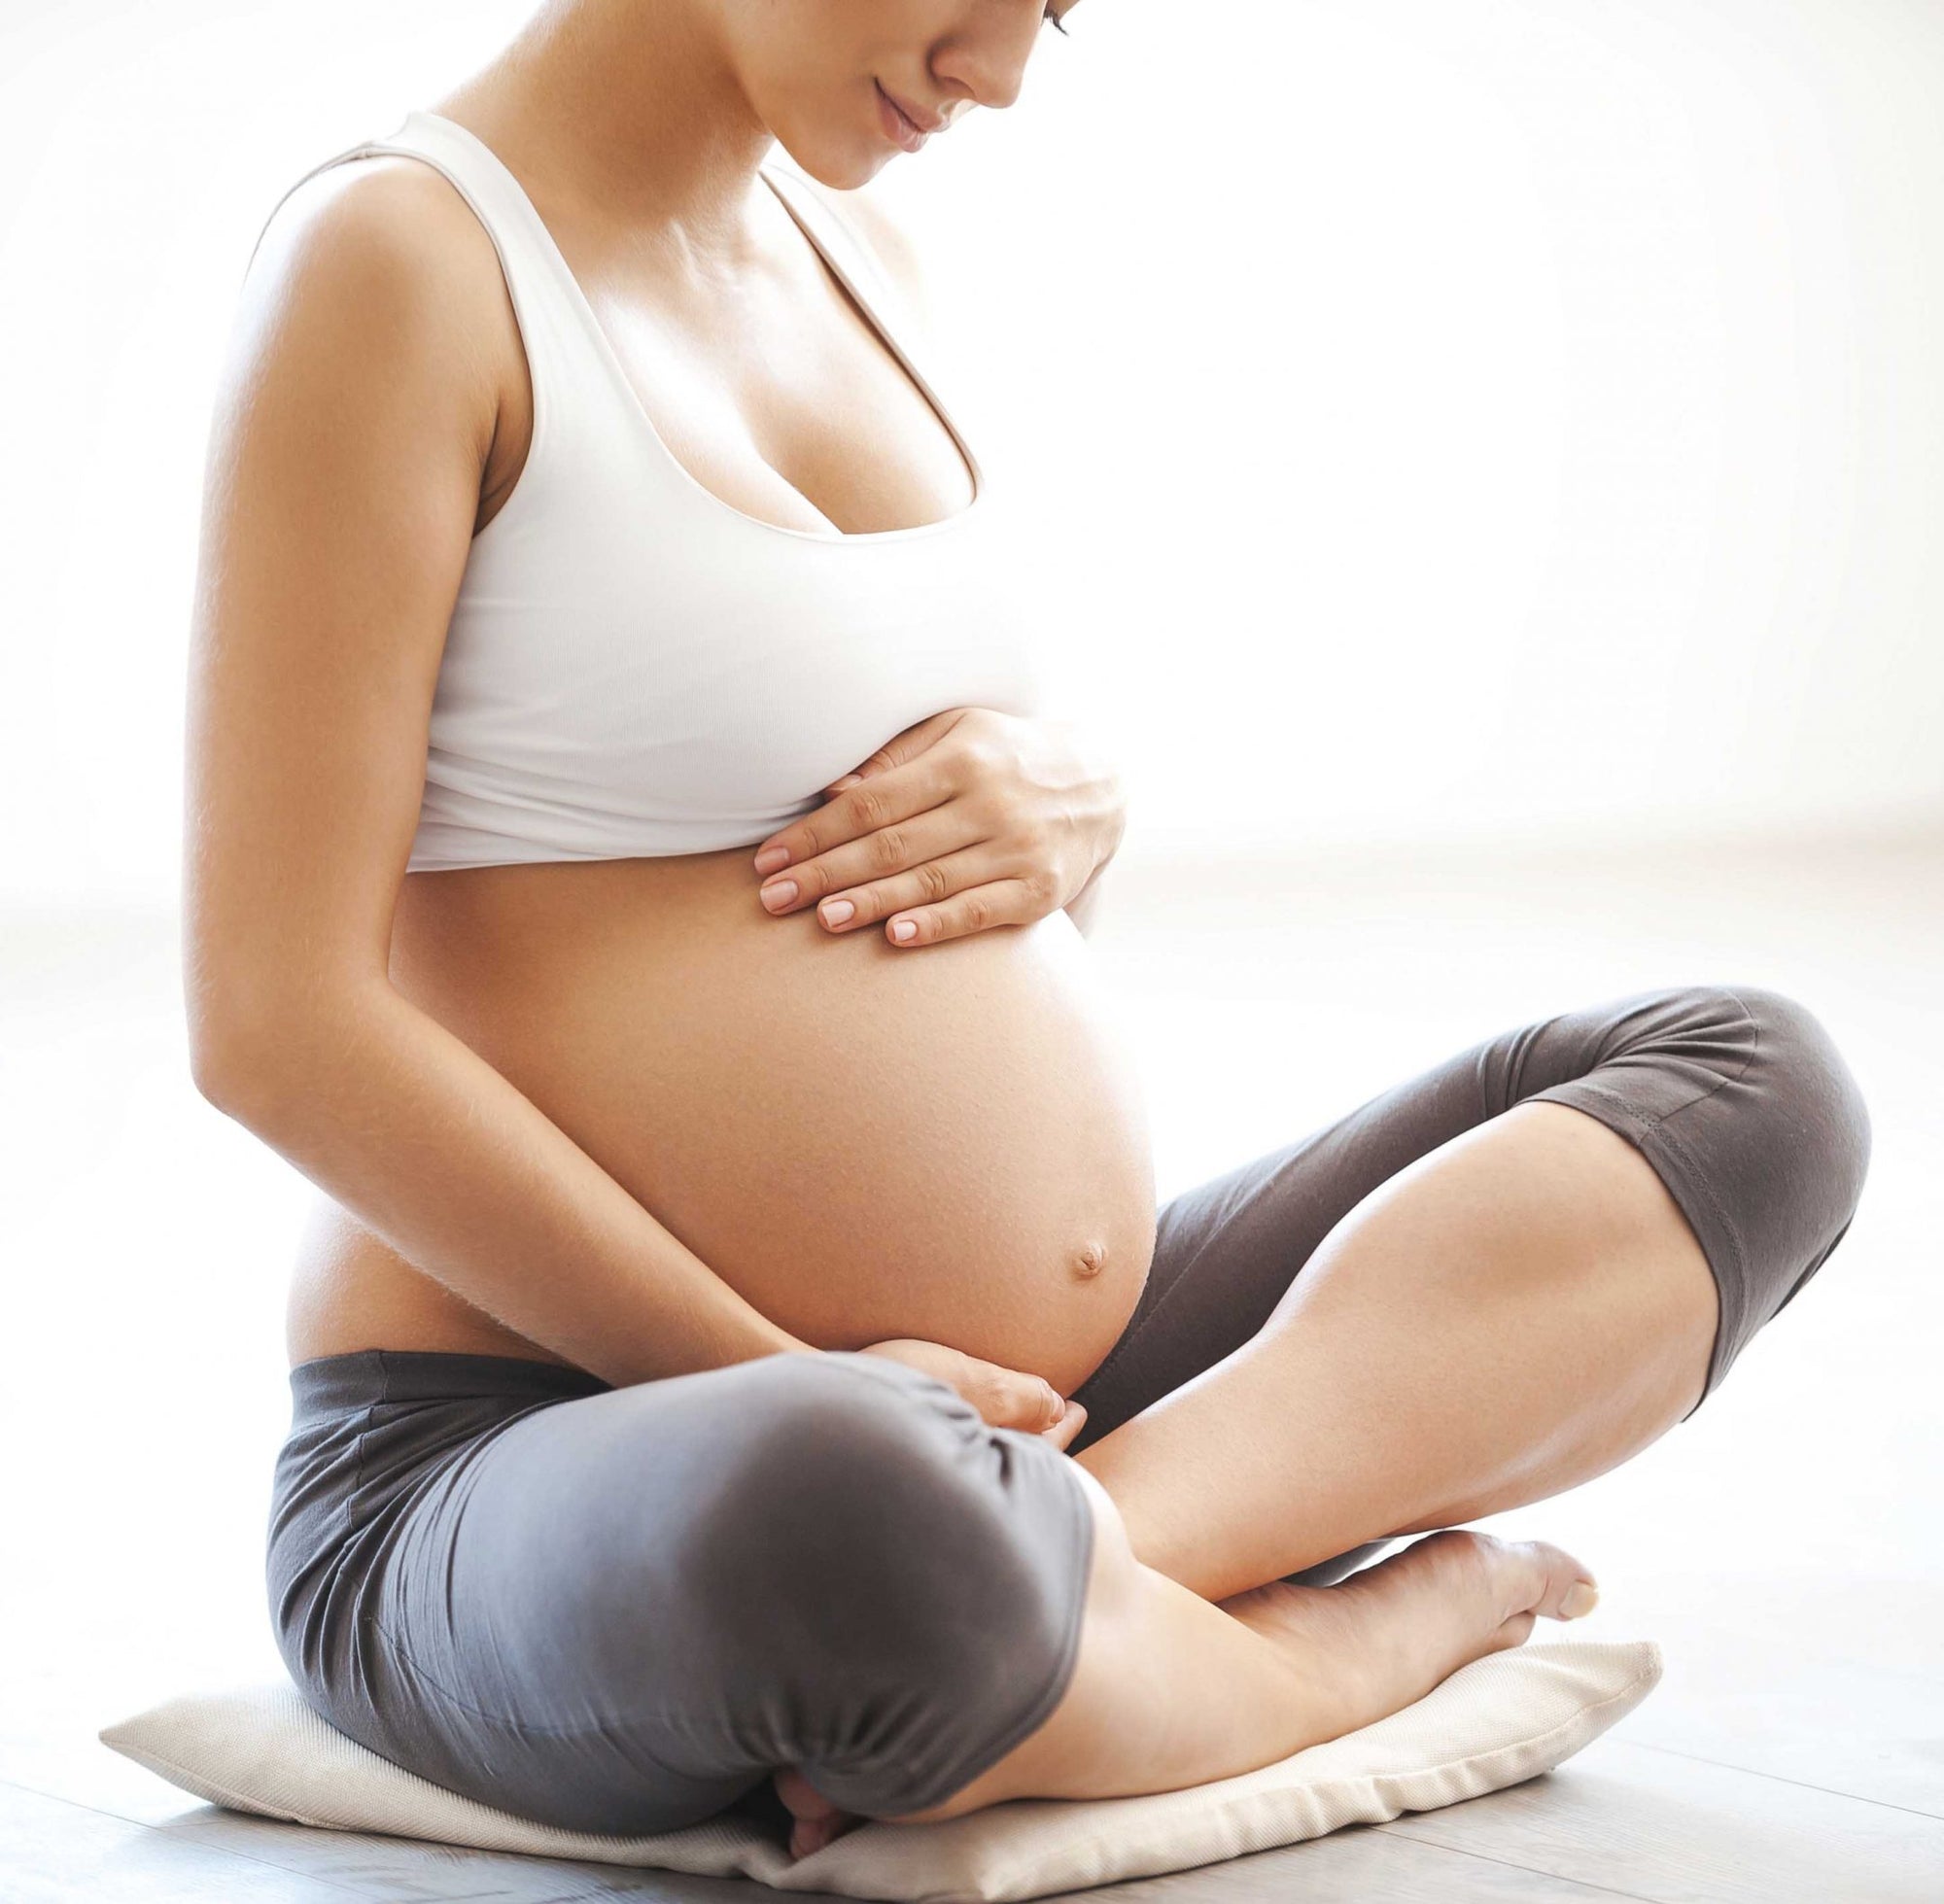 How to flip a breech or transverse baby